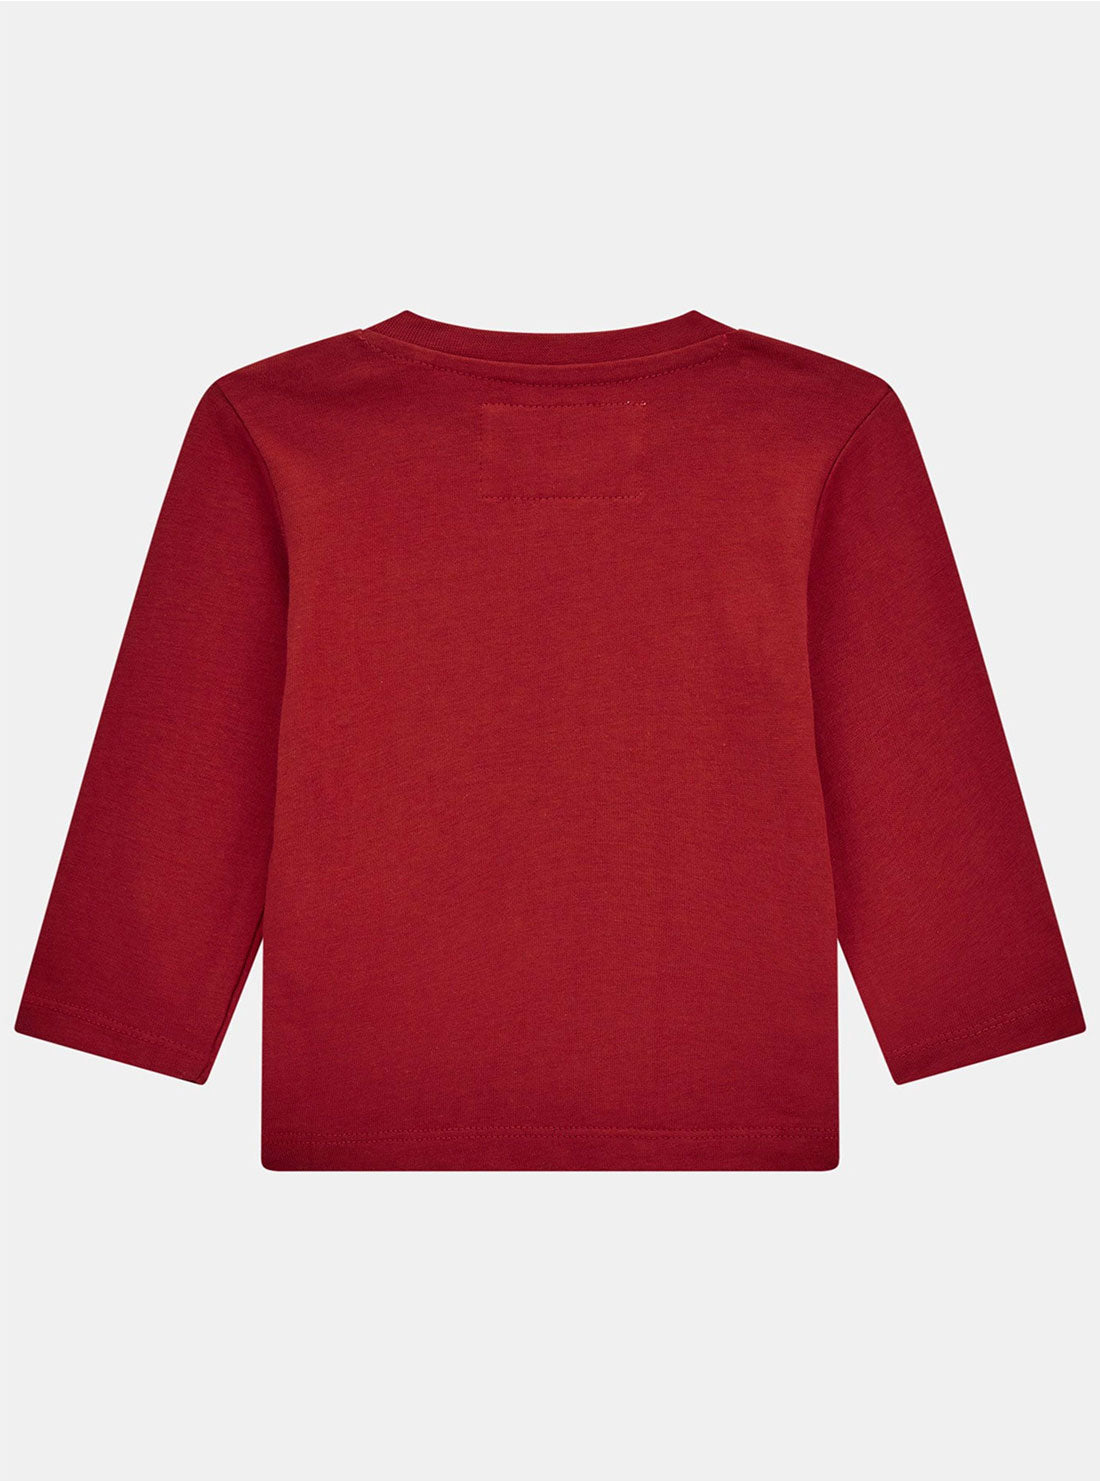 GUESS Red Long Sleeve T-Shirt (3-24M) back view